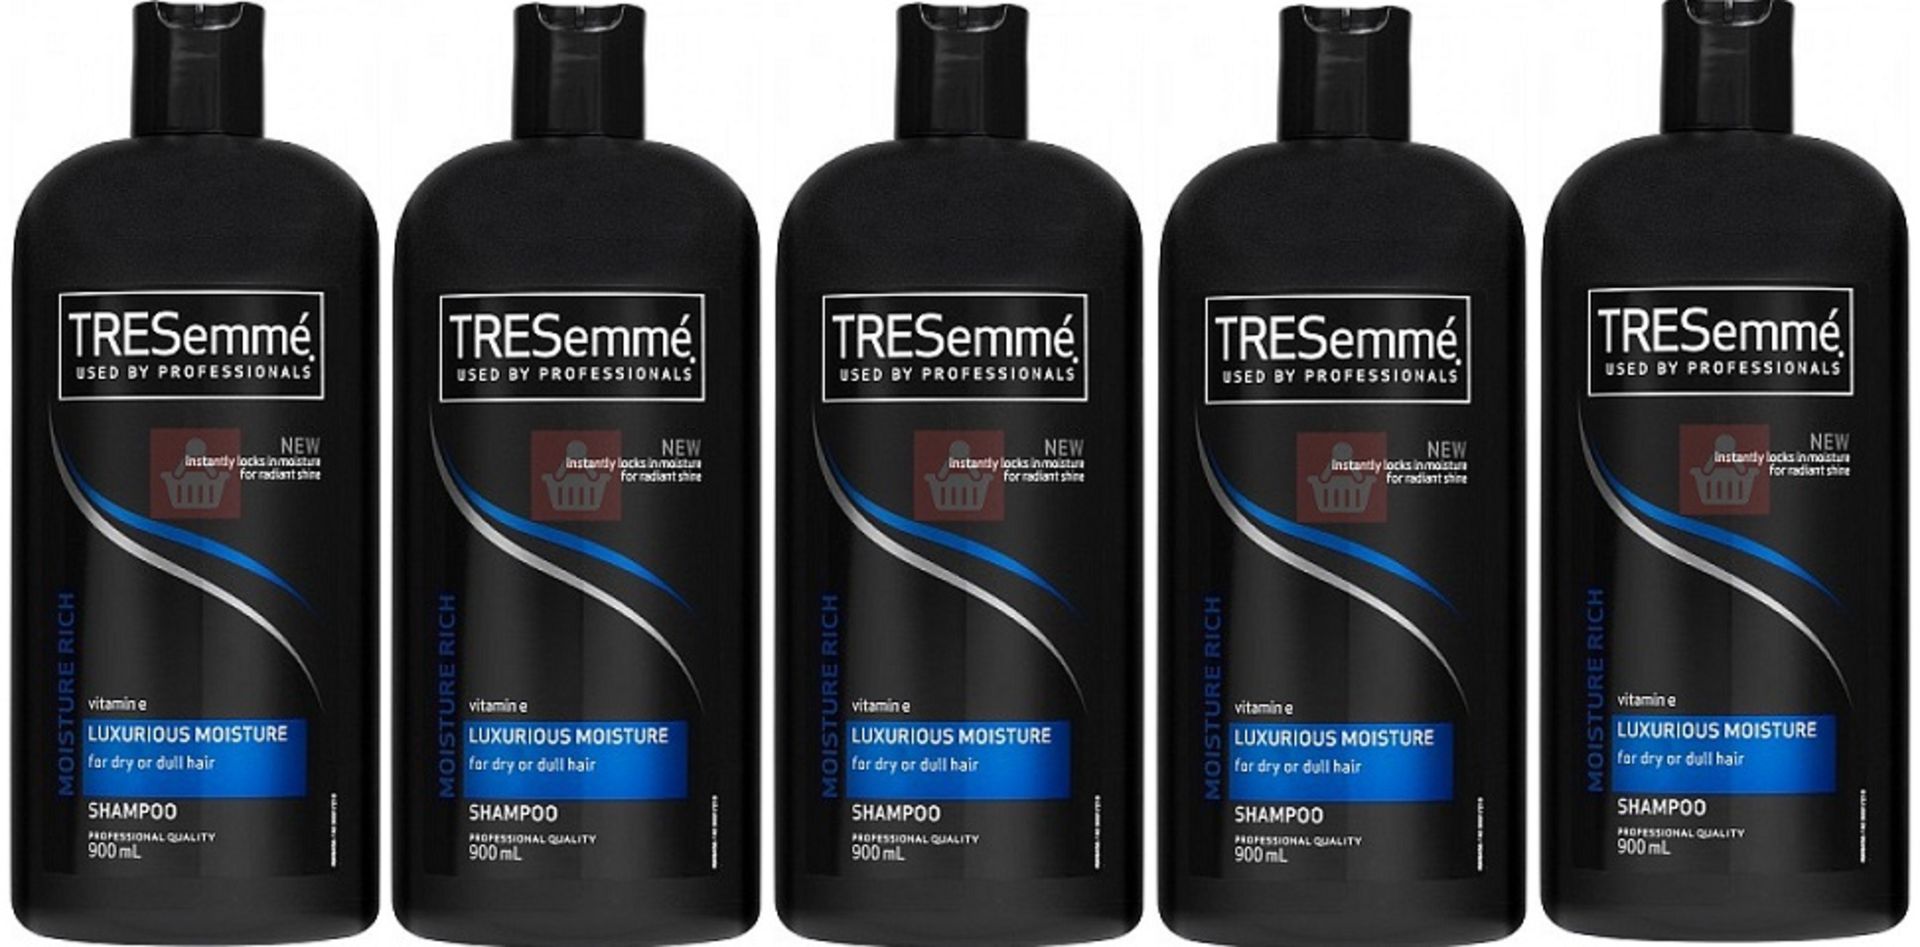 V Brand New Lot of 5 TRESemme Professional 900ml Luxurious Moisture Shampoo (for dry hair)With